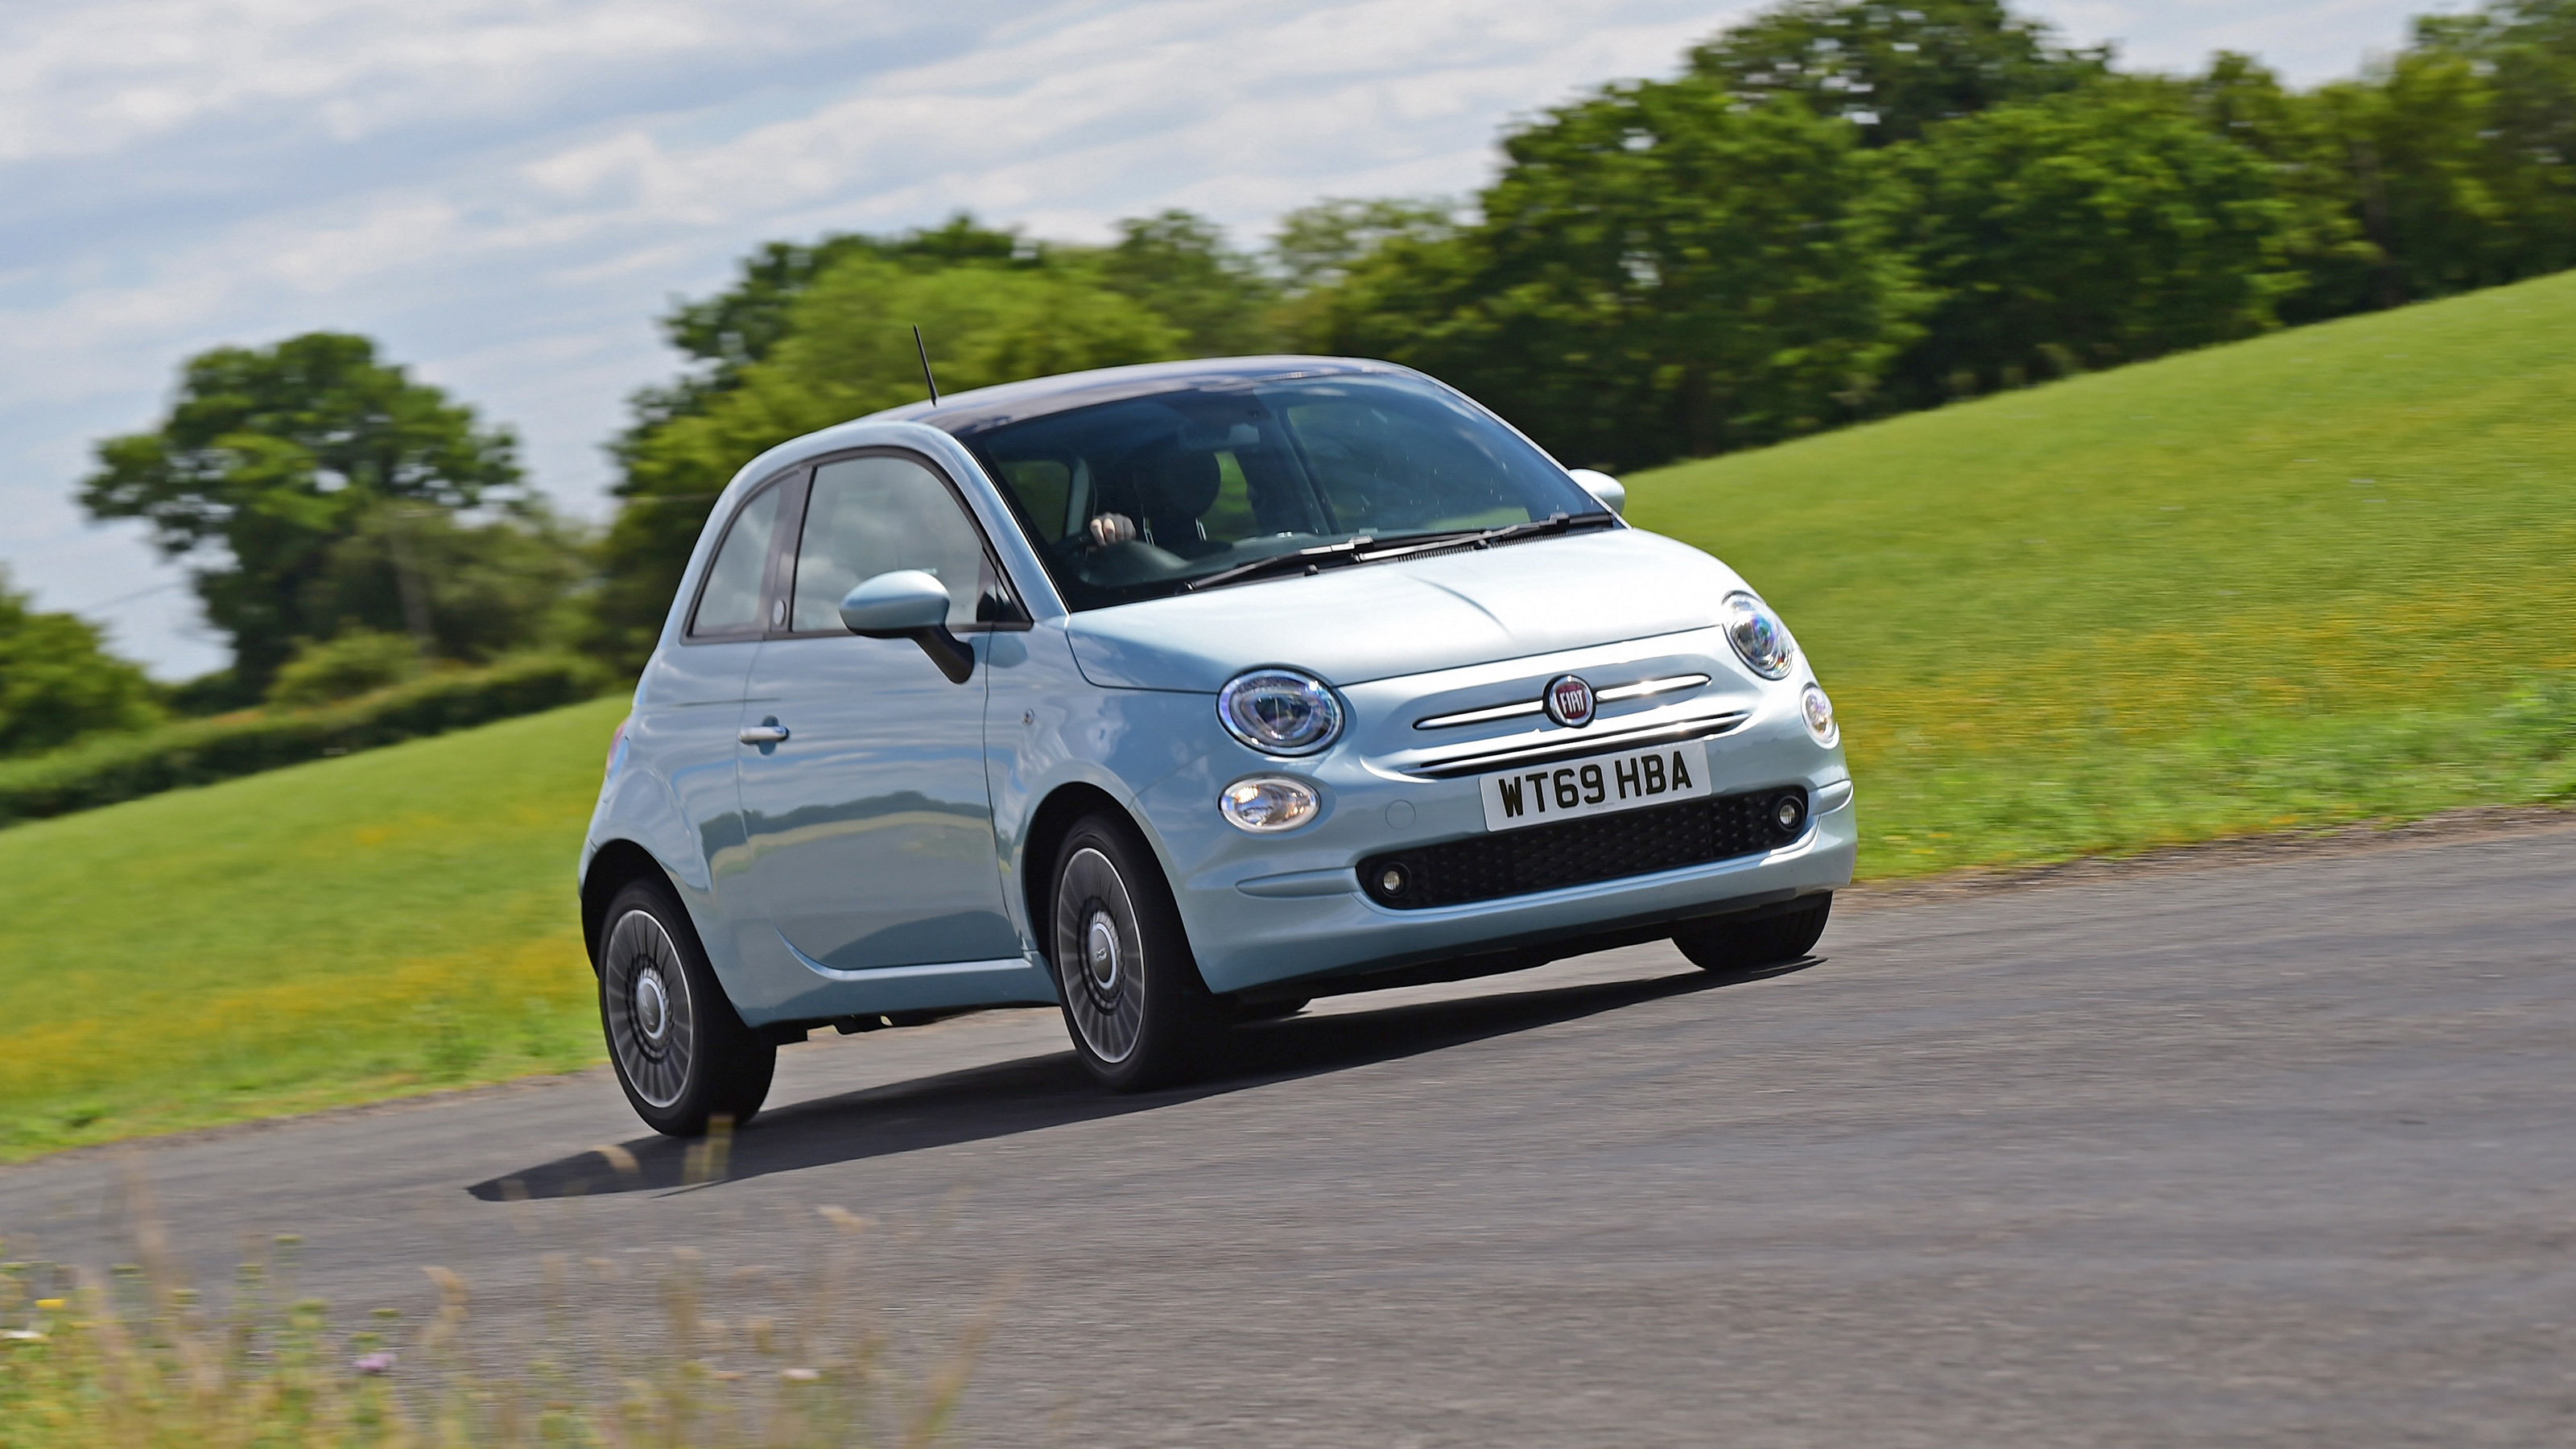 Fiat 500 Owner Reviews: Problems & Reliability |